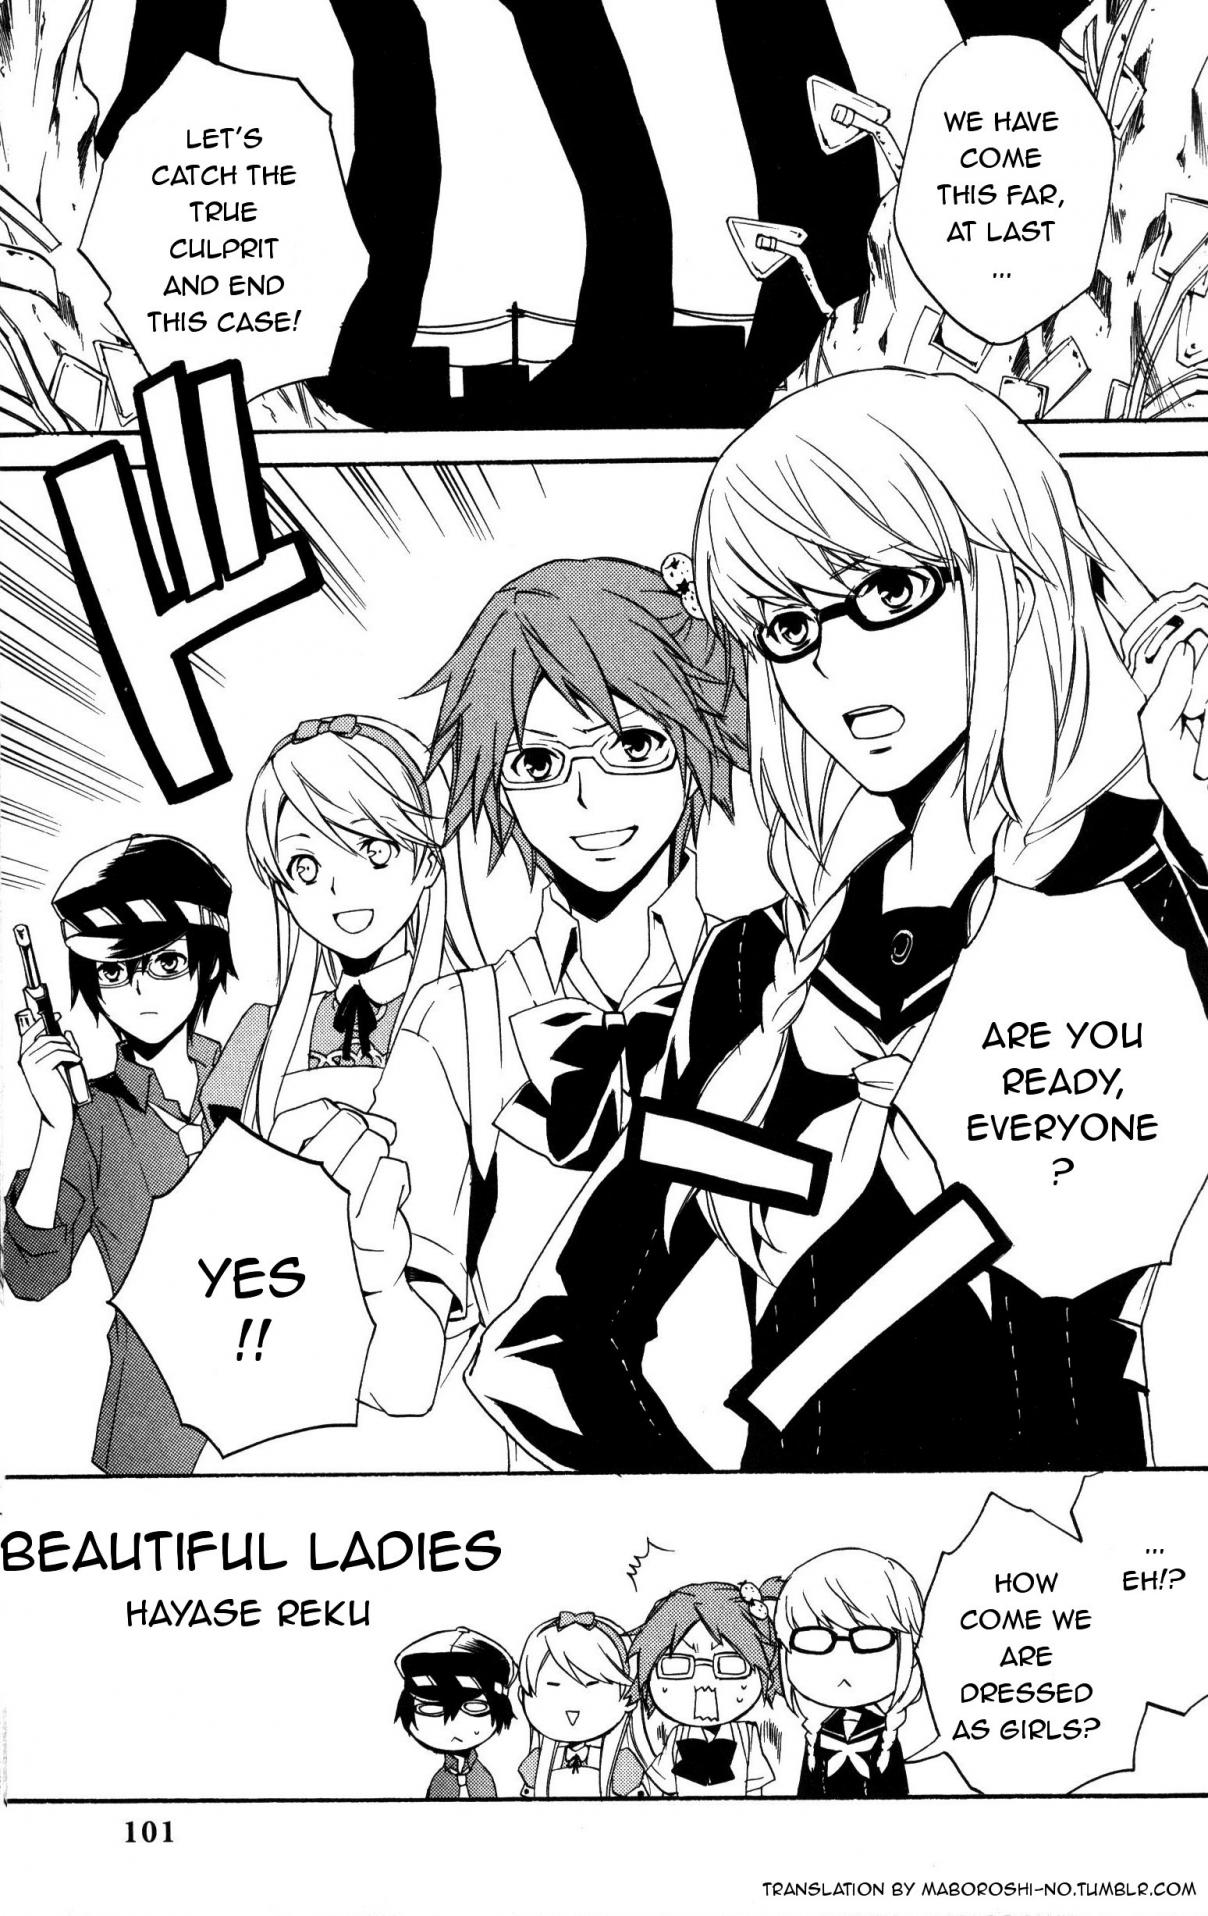 Persona 4 The Golden Comic Anthology Vol. 1 Ch. 9 Beautiful Ladies